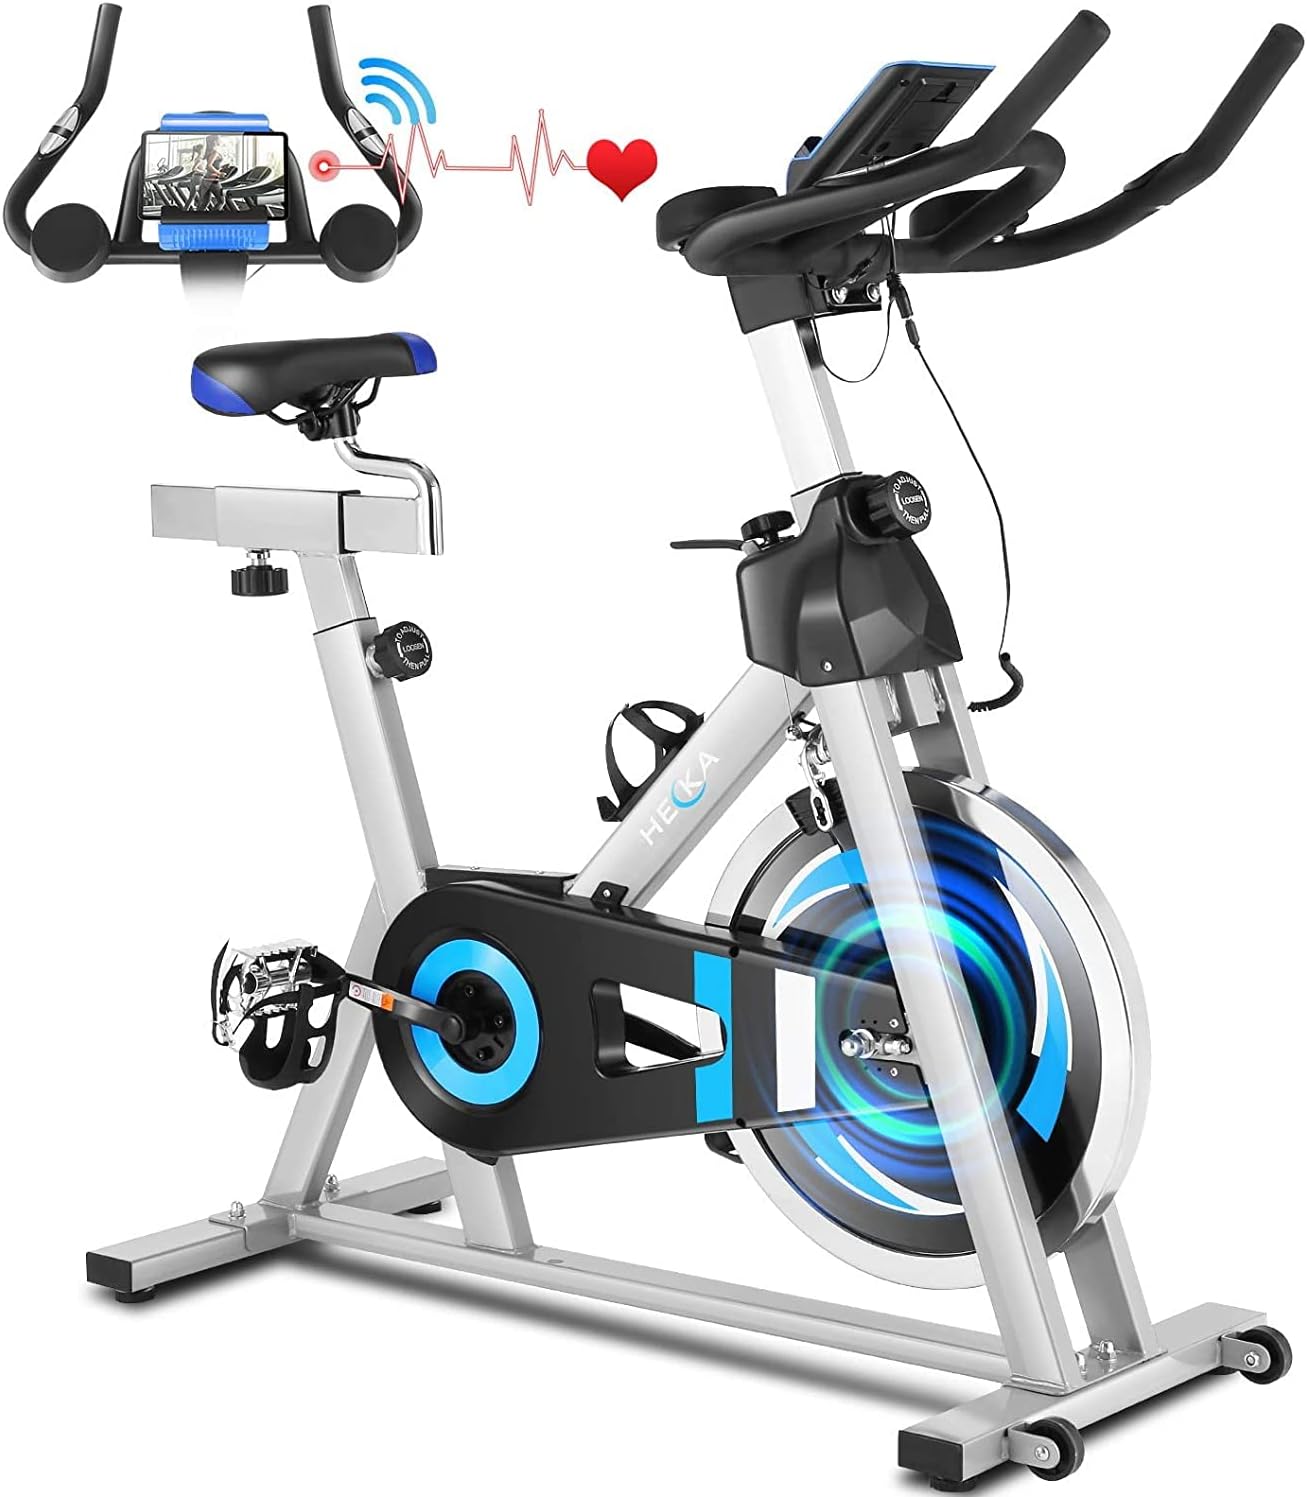 HEKA New Carbon Steel Indoor Exercise Bicycle with Heart Rate Cardio & Tablet Holder & APP Electronic Watch, 275Lbs Weight Capacity